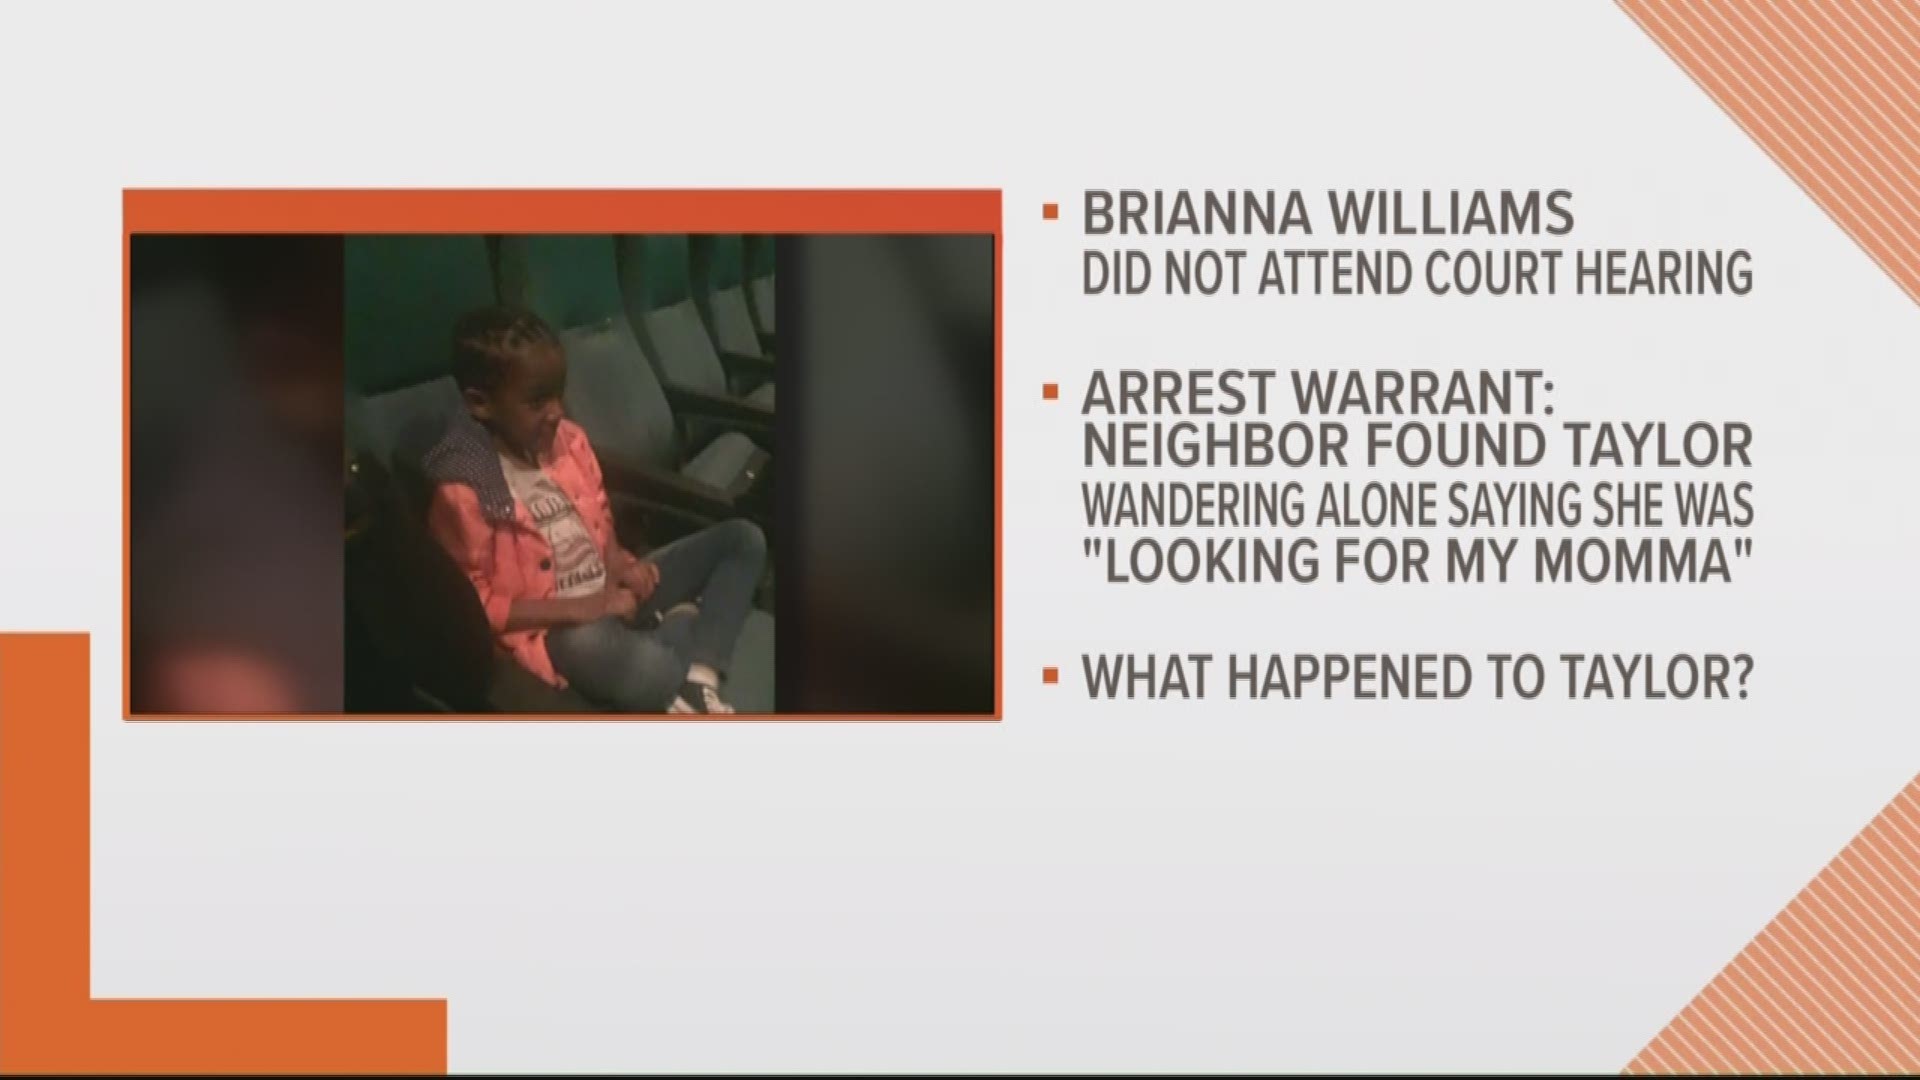 Brianna Williams, the mother of missing 5-year-old Taylor Williams, was taken to the hospital on Tuesday after a reported suicide attempt.